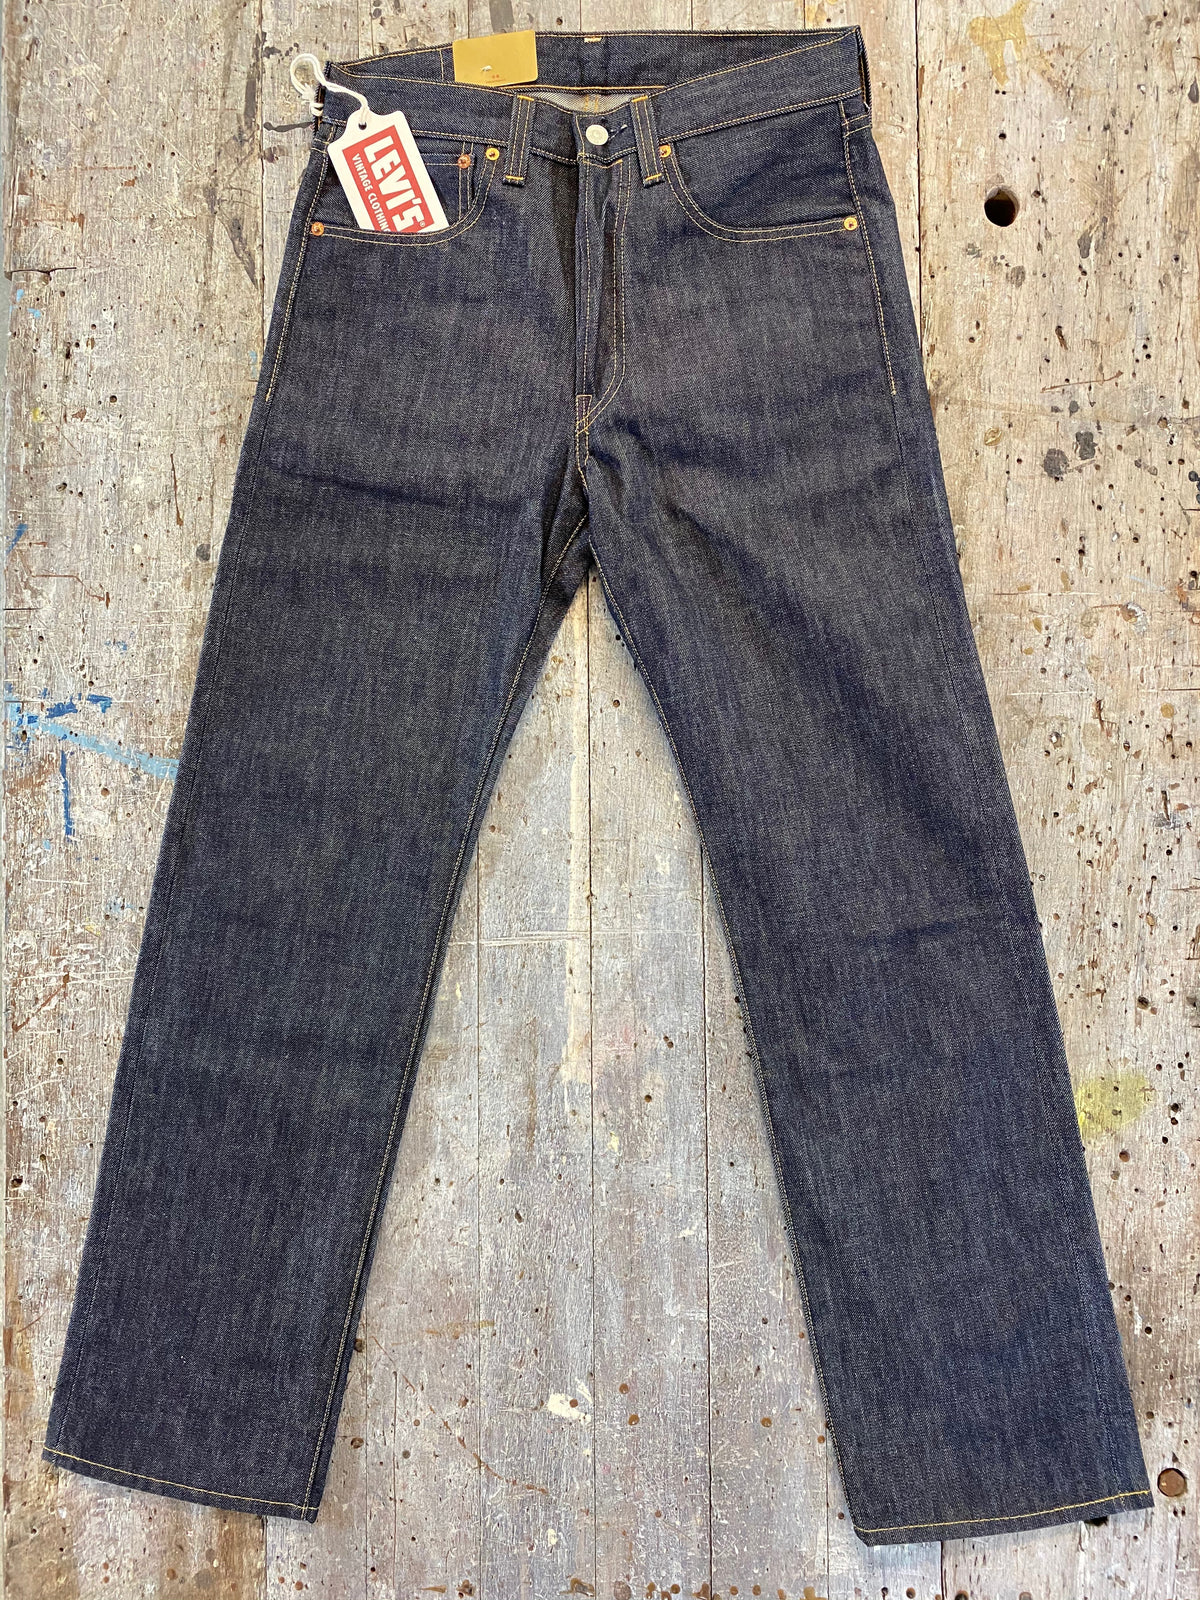 LEVIS VINTAGE CLOTHING 1947 501 RAW SHRINK TO FIT